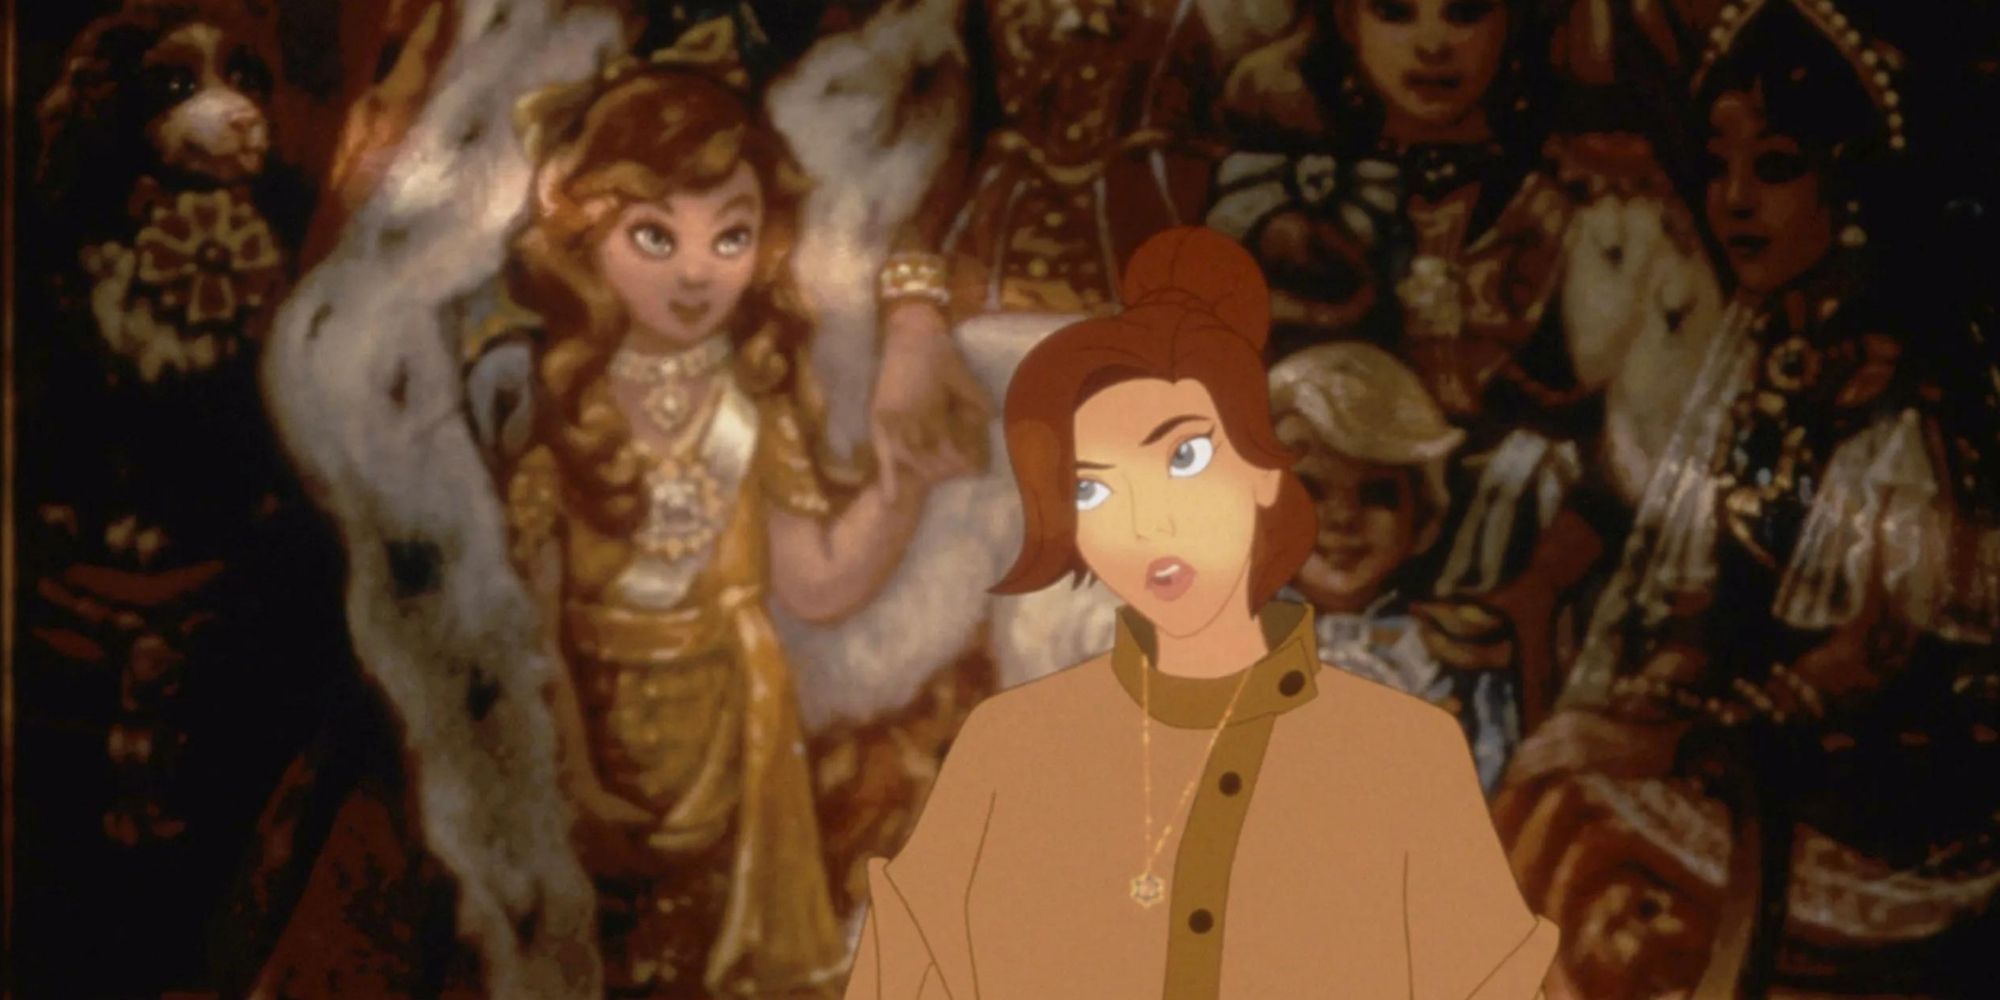 Princess Anastasia leaned against a painting